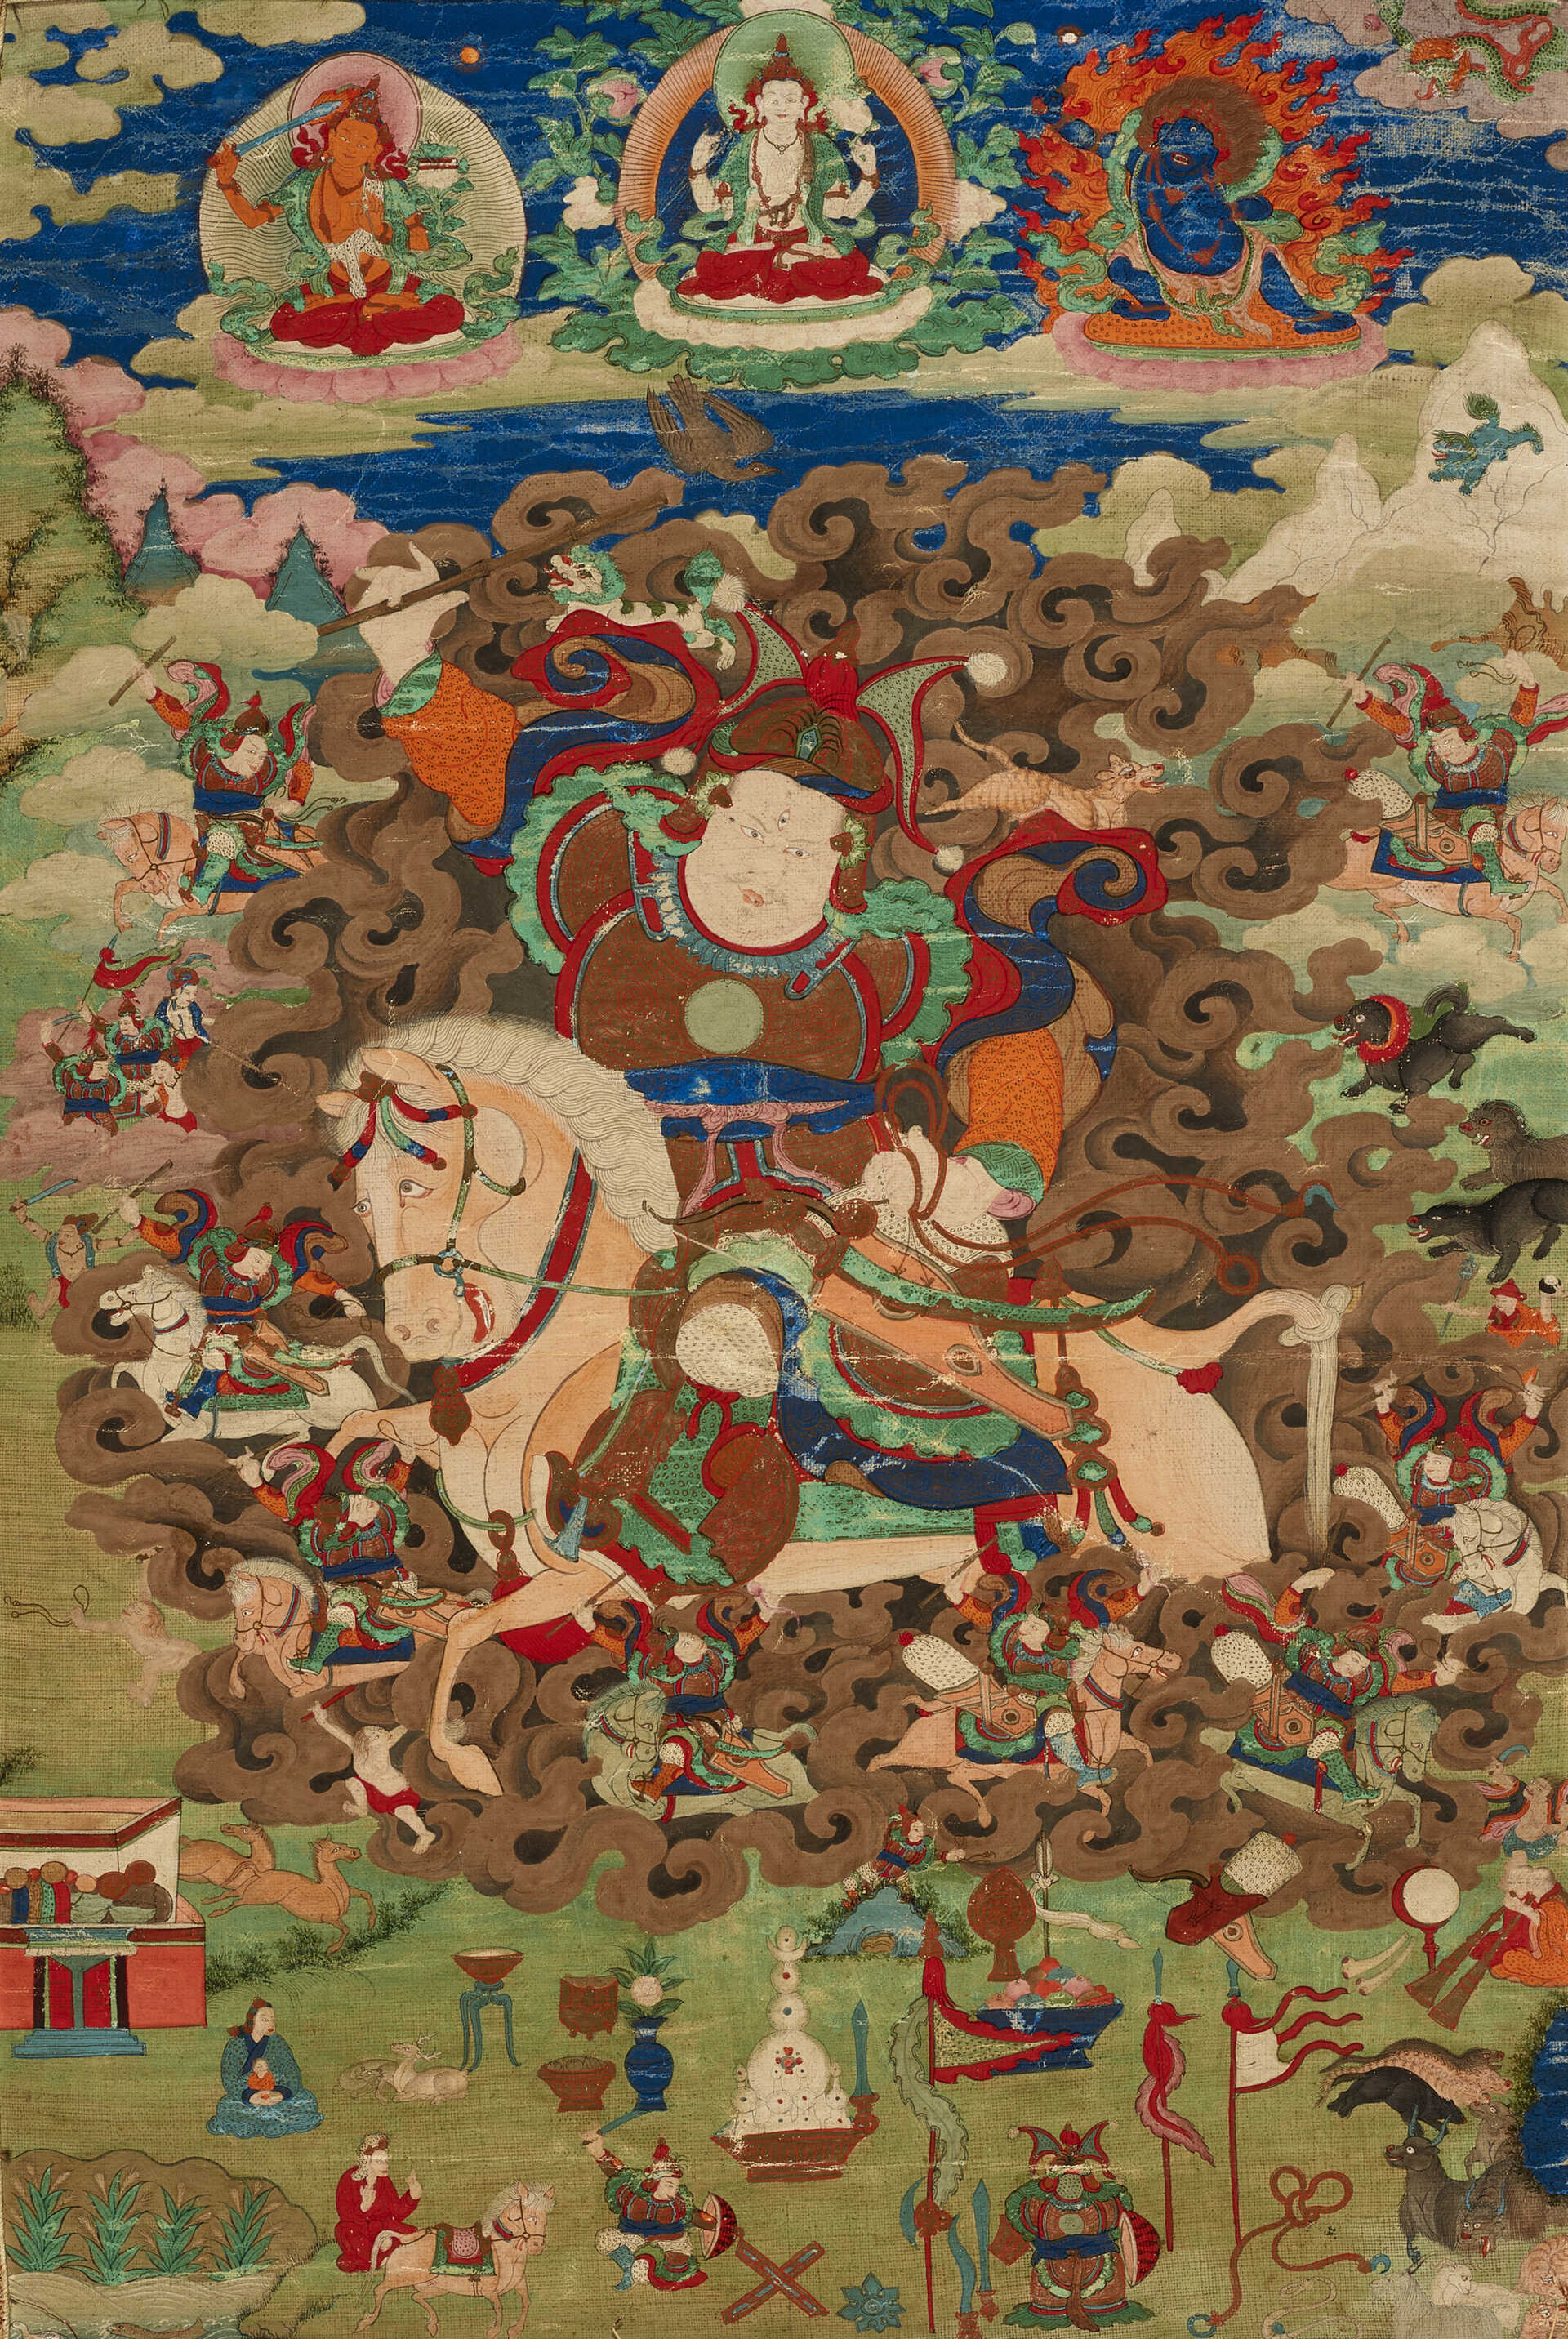 A PAINTING OF GESAR